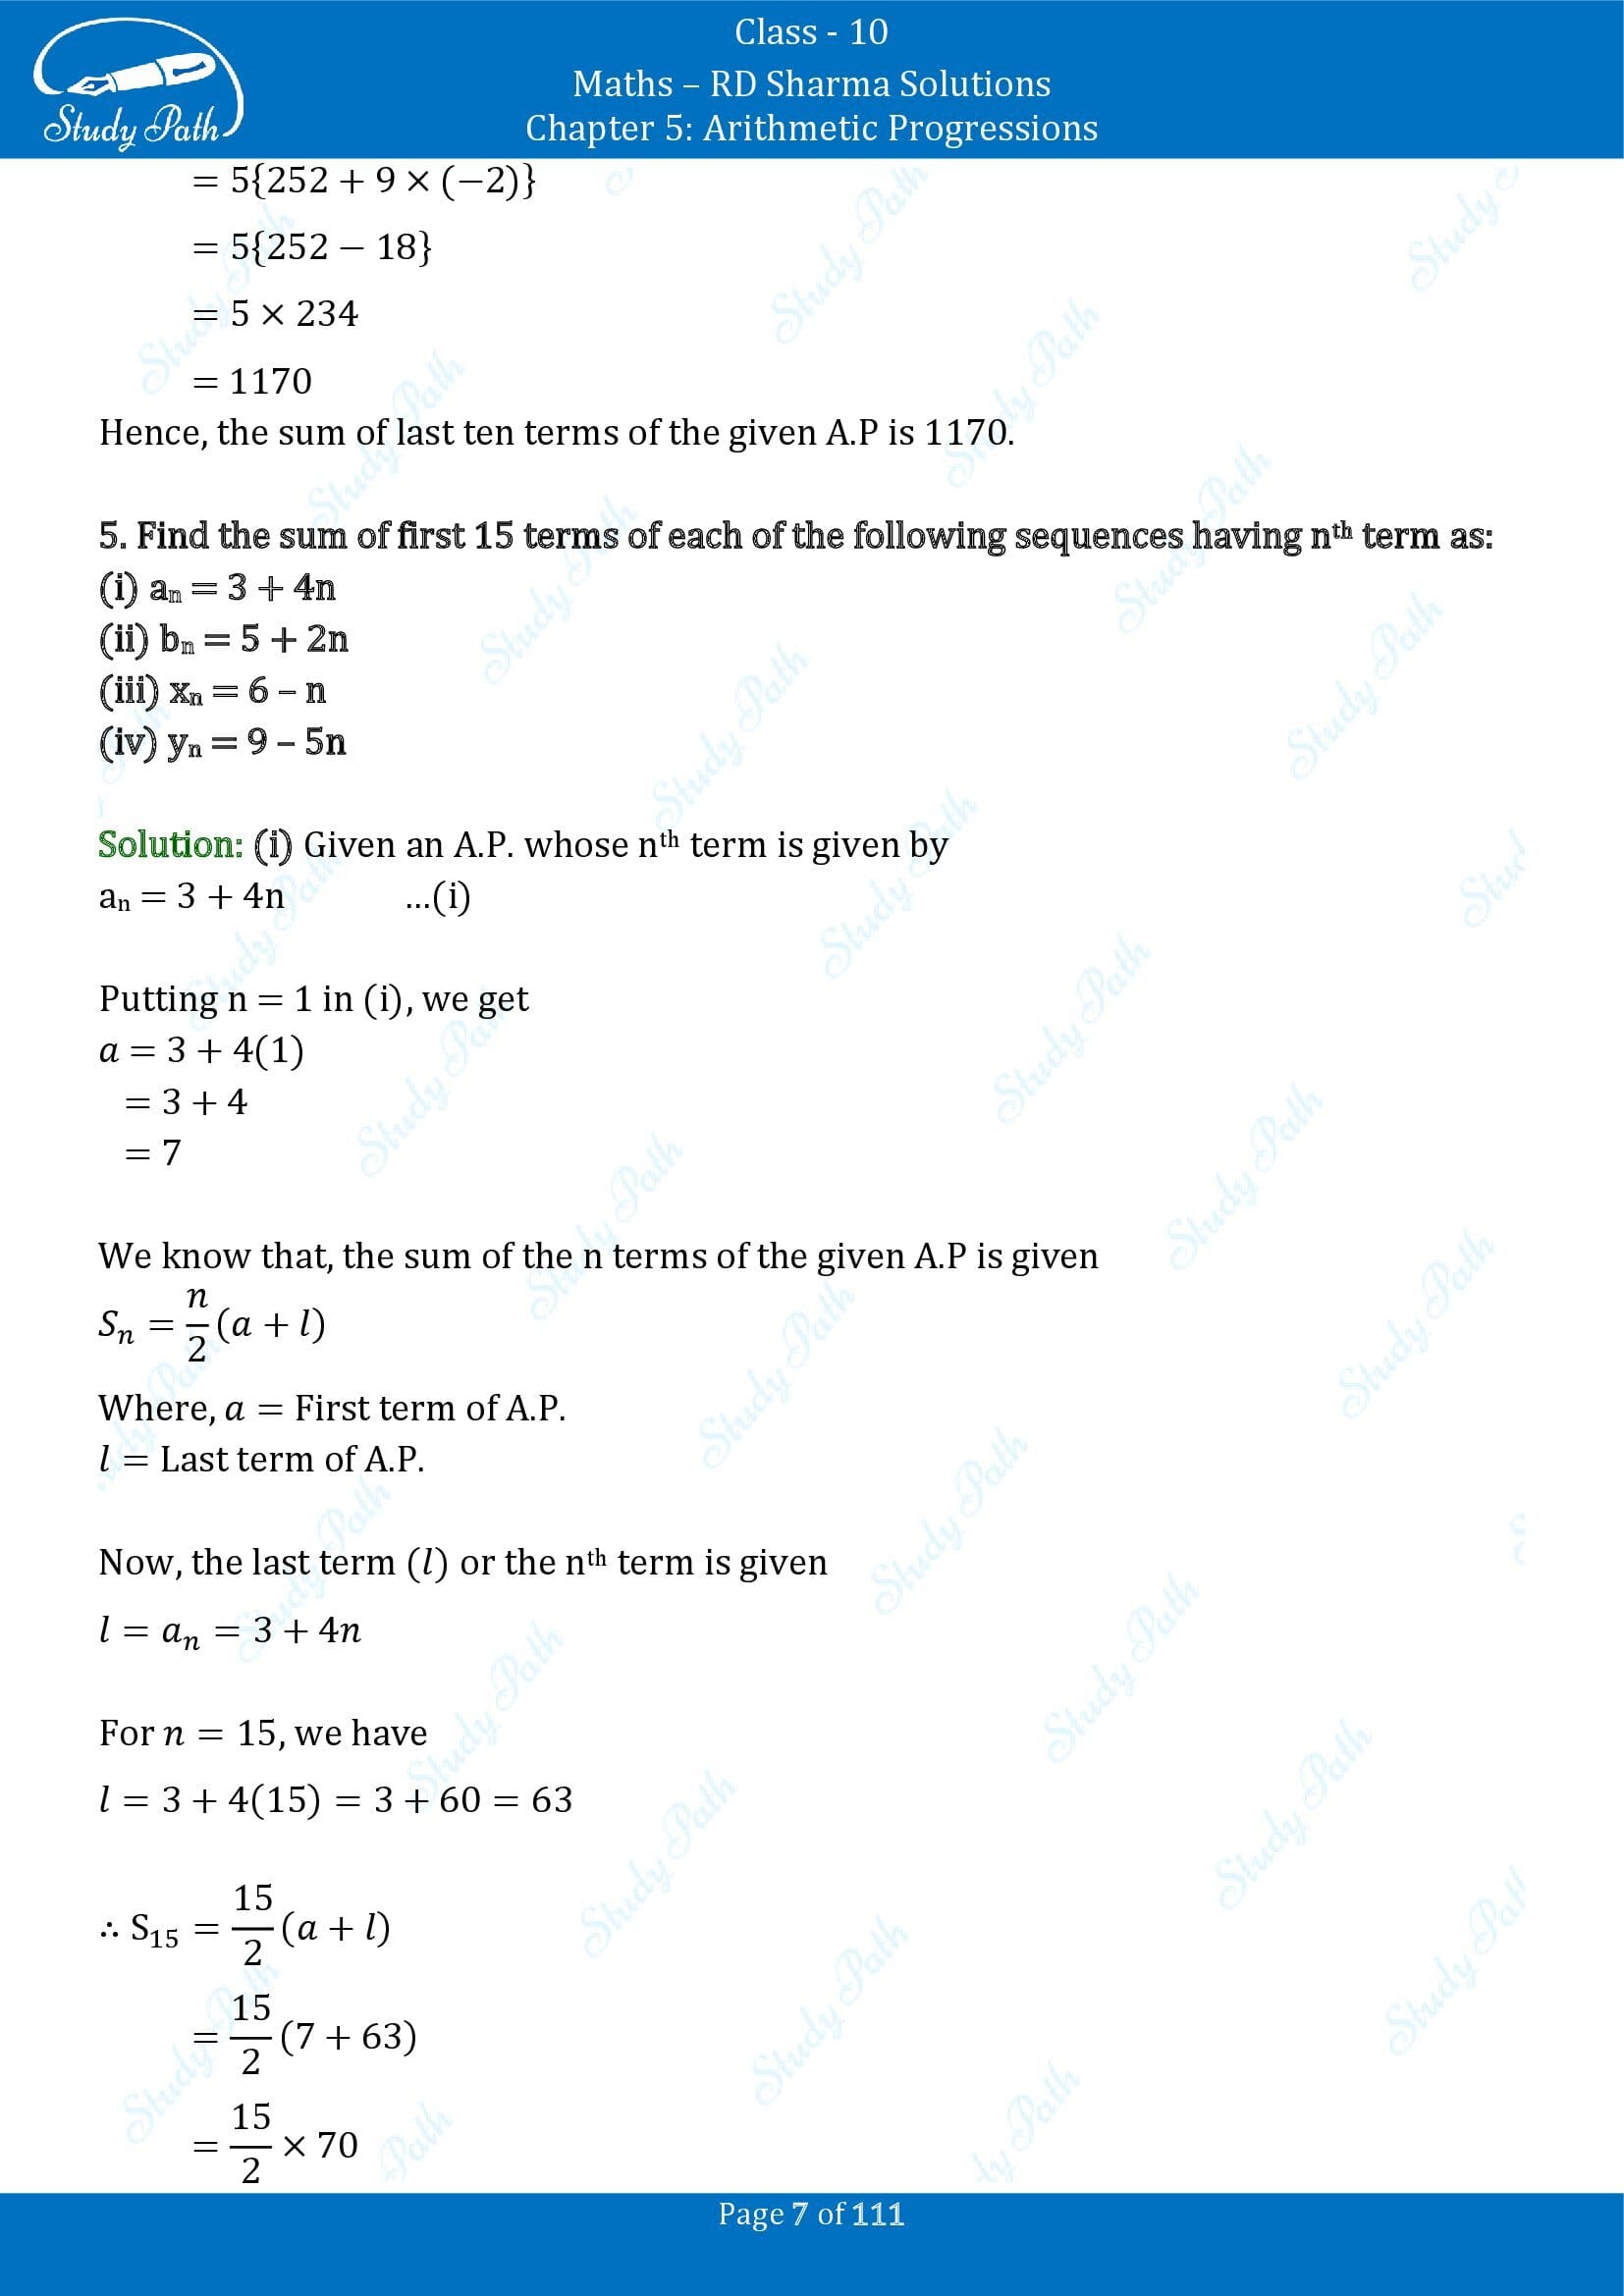 RD Sharma Solutions Class 10 Chapter 5 Arithmetic Progressions Exercise 5.6 00007